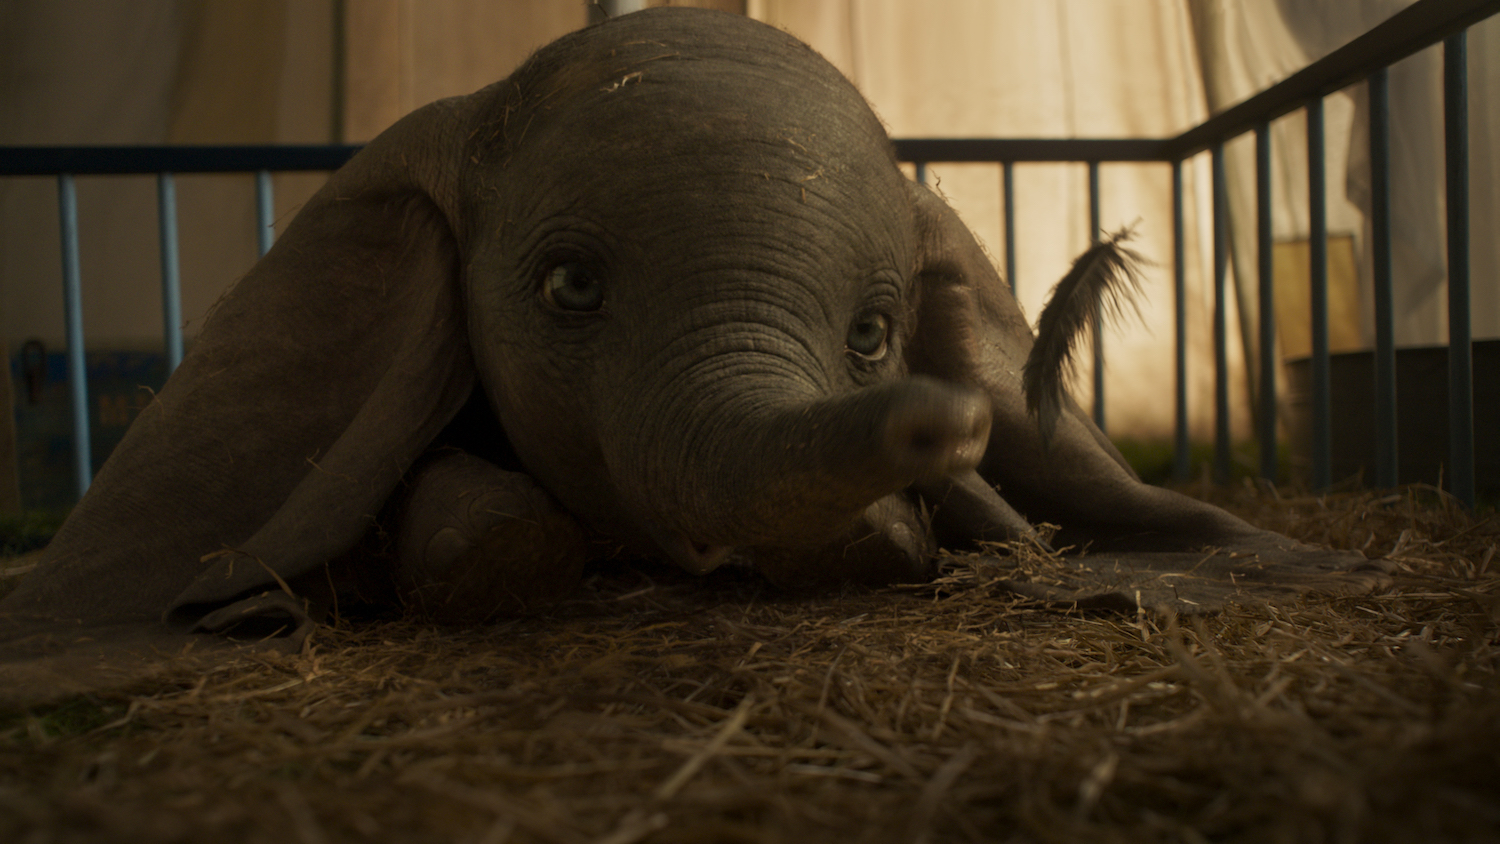 New Trailer! Disney’s Live-Action ‘Dumbo’ Makes Its Official Debut